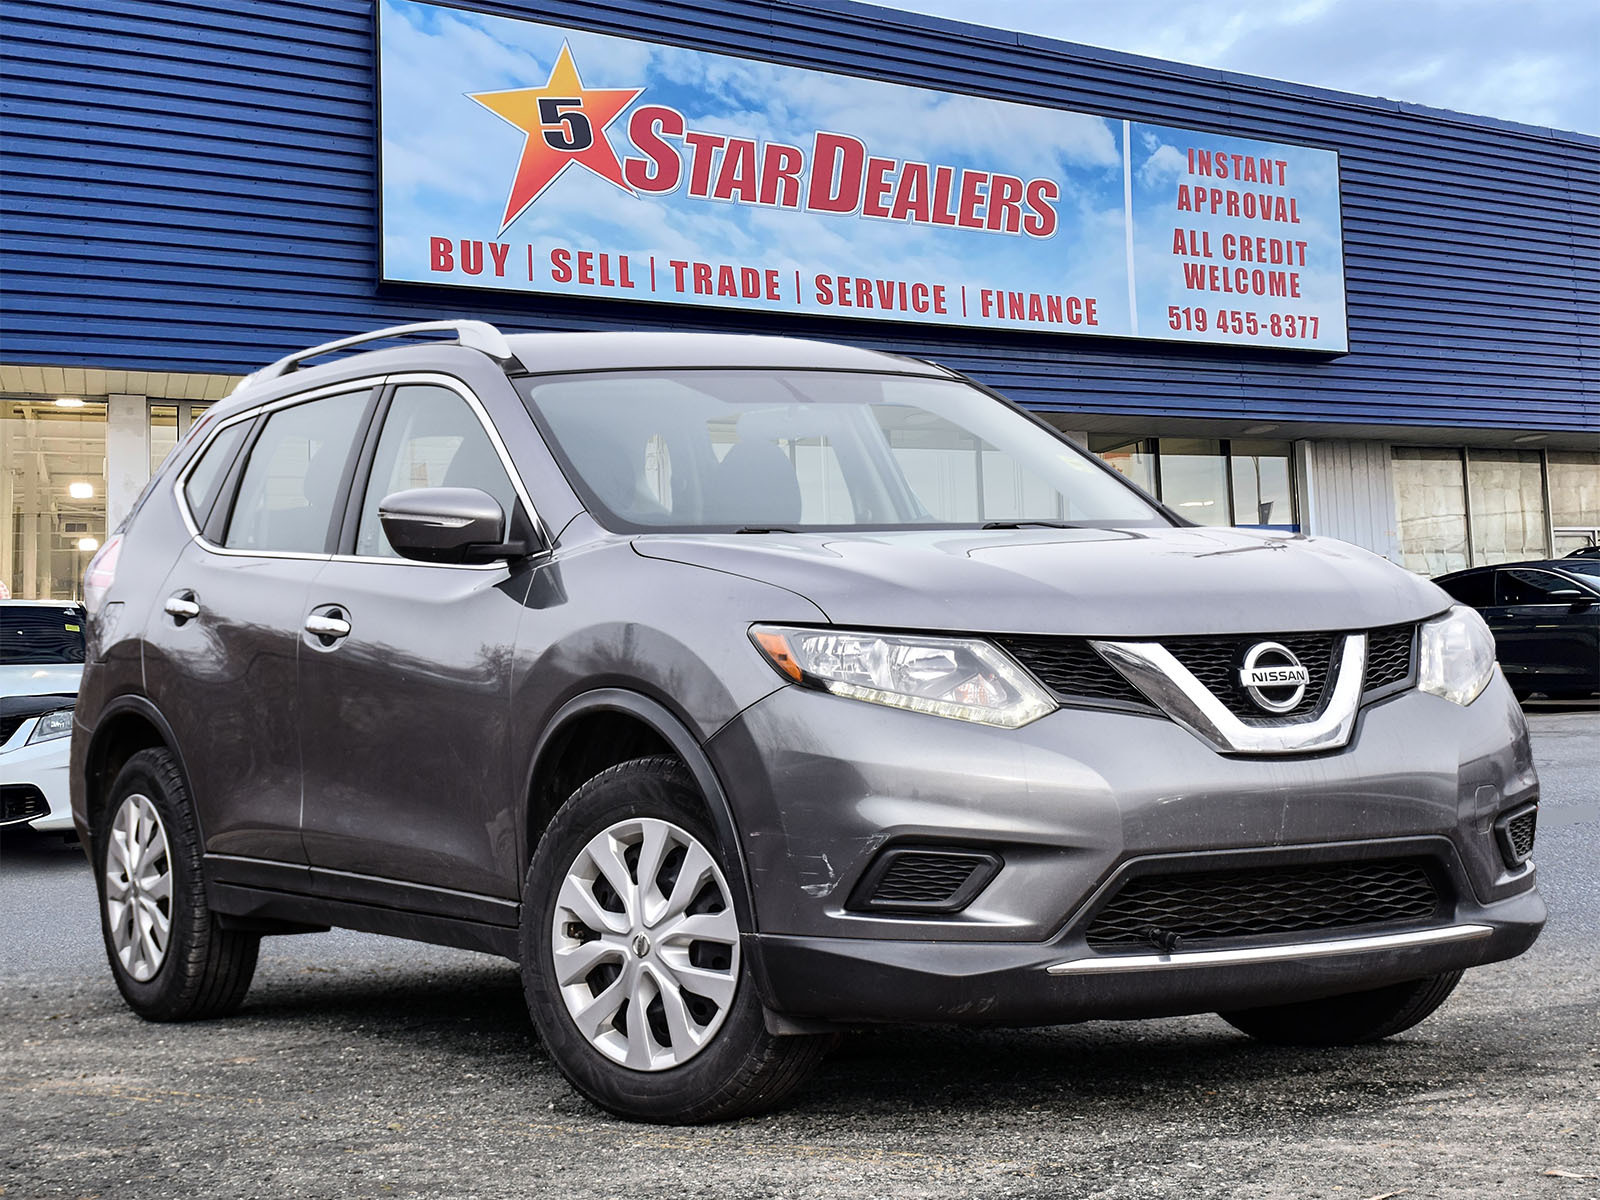 2014 Nissan Rogue CERTIFIED AWD LOW KM MINT  ! WE FINANCE ALL CREDIT